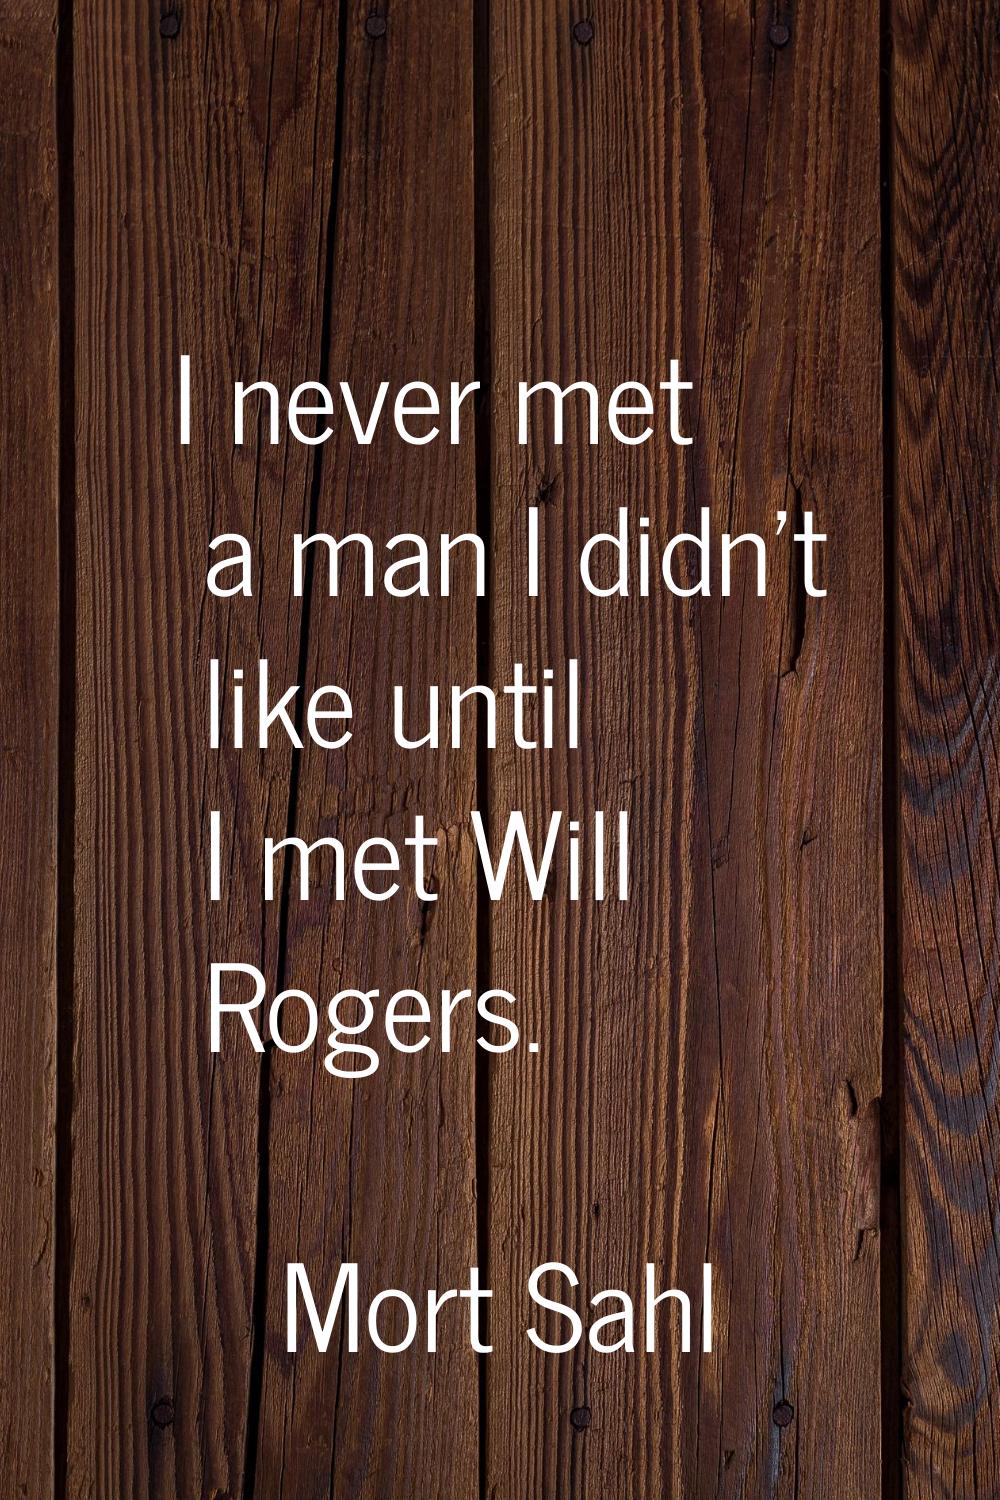 I never met a man I didn't like until I met Will Rogers.